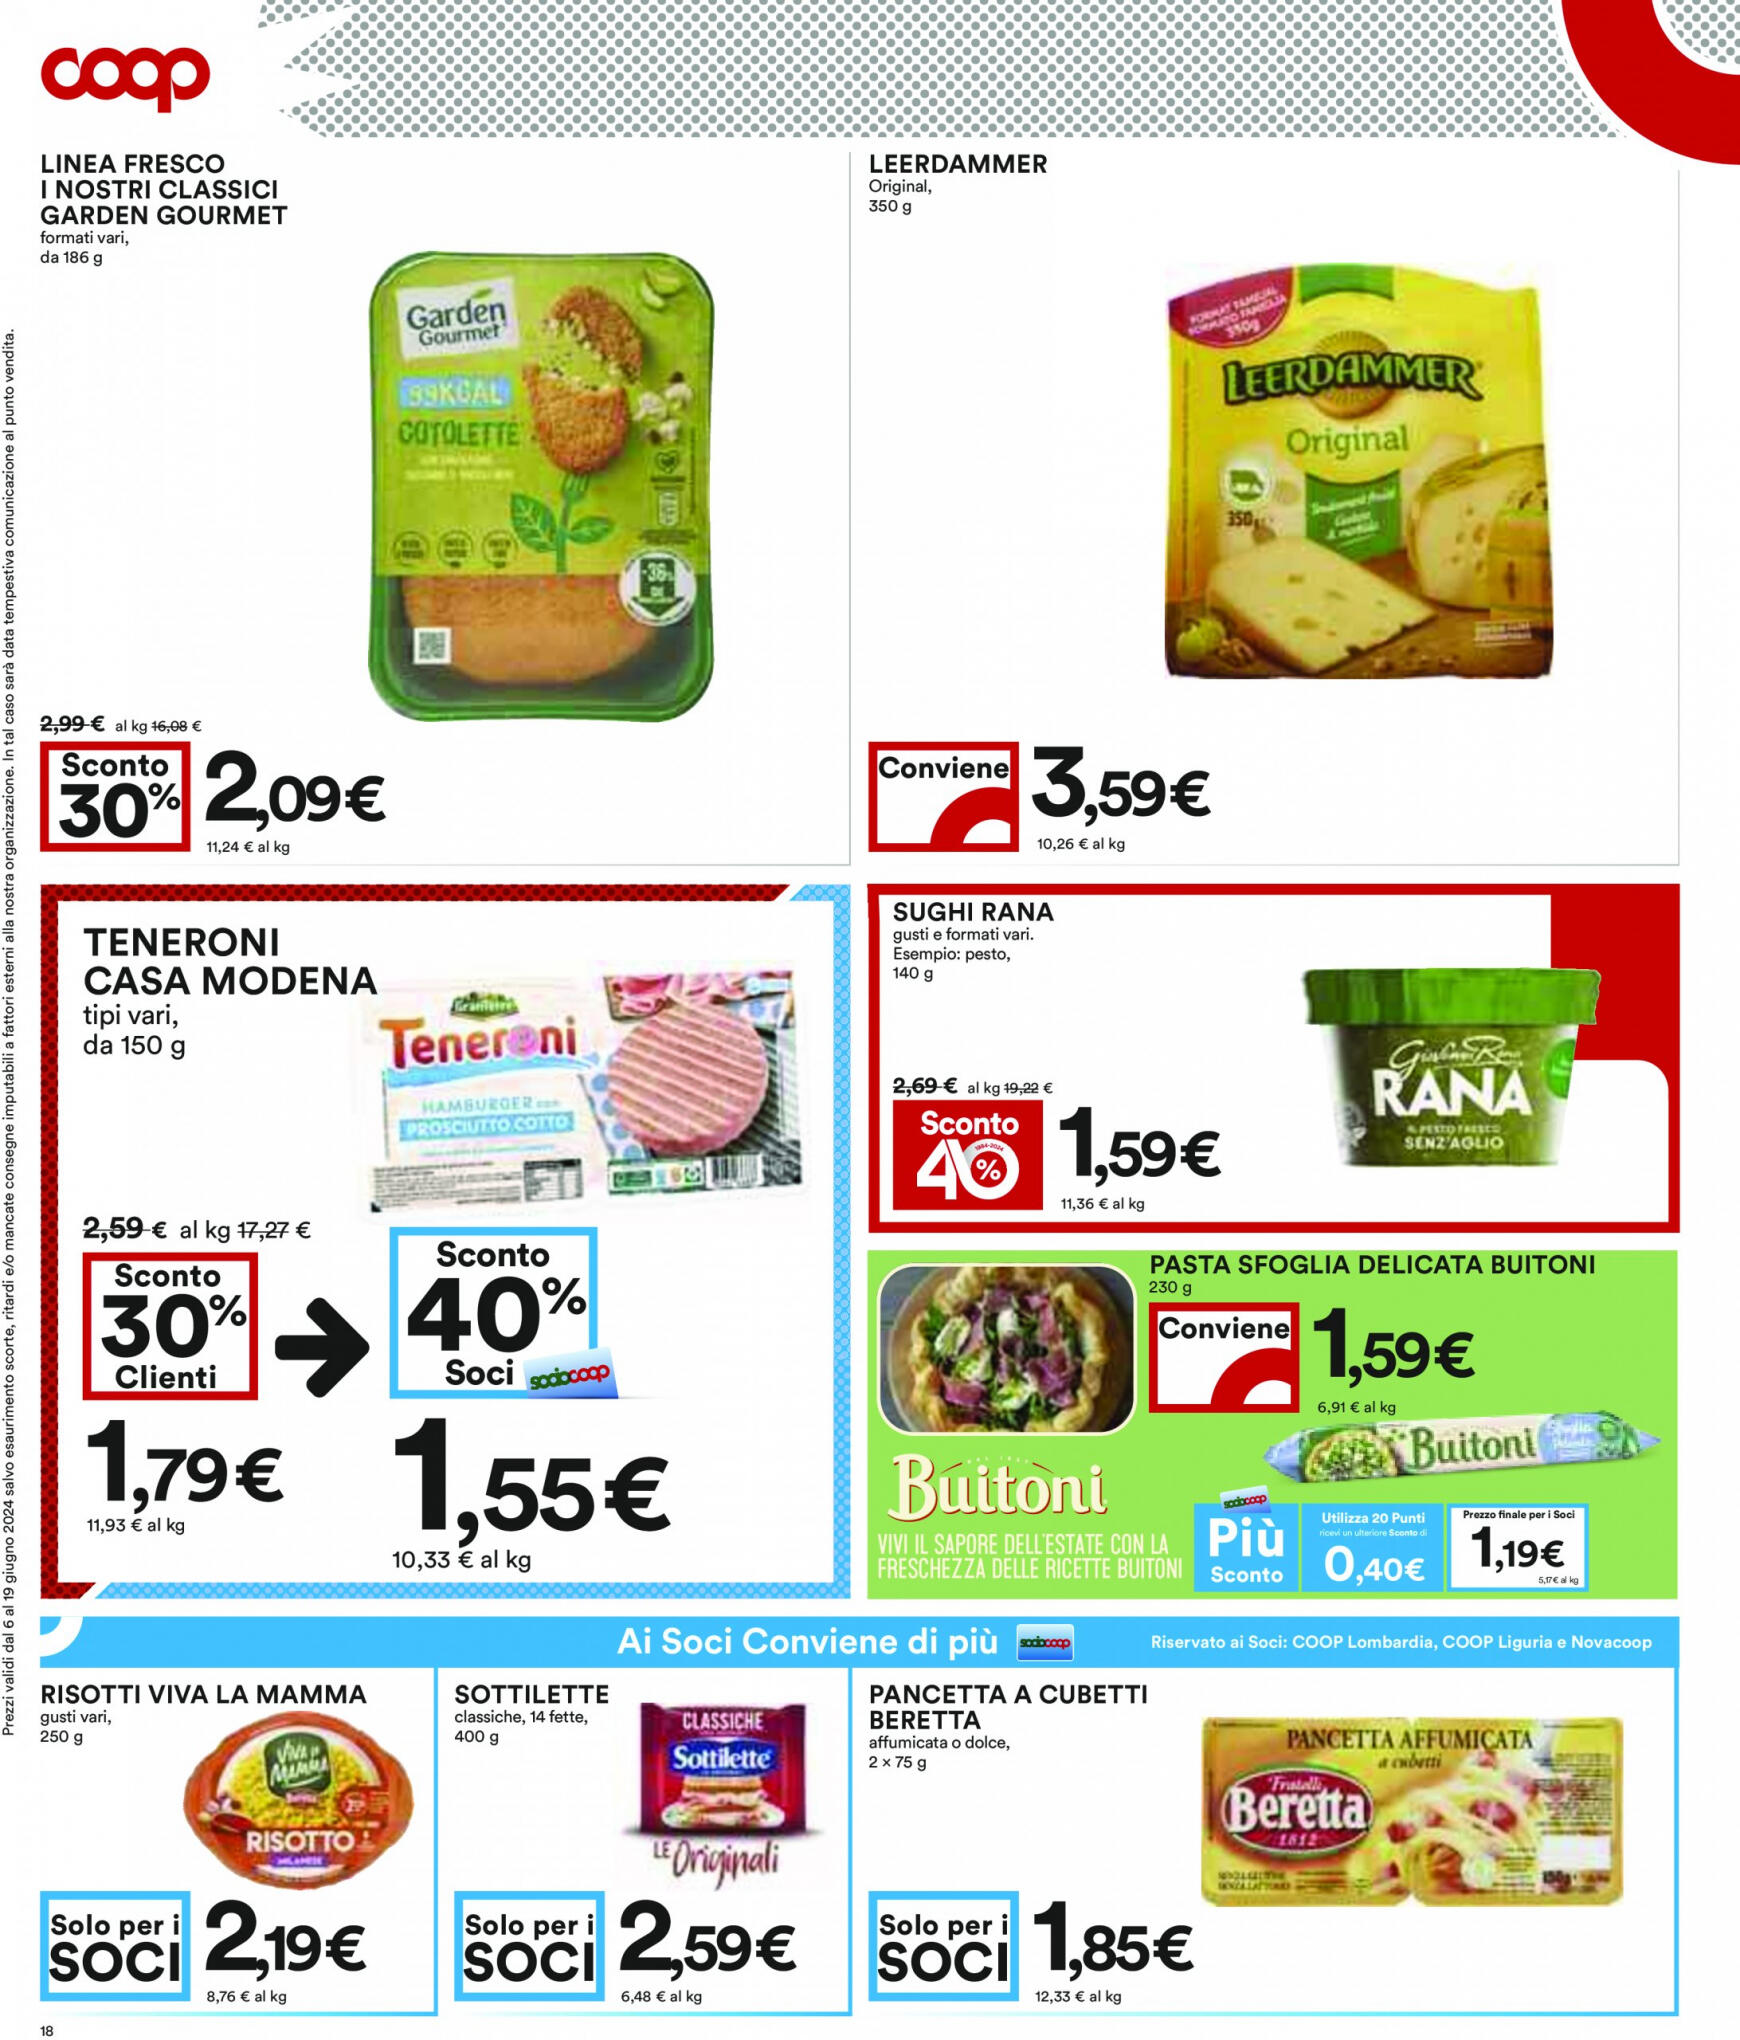 coop - Nuovo volantino Coop 10.06. - 19.06. - page: 18